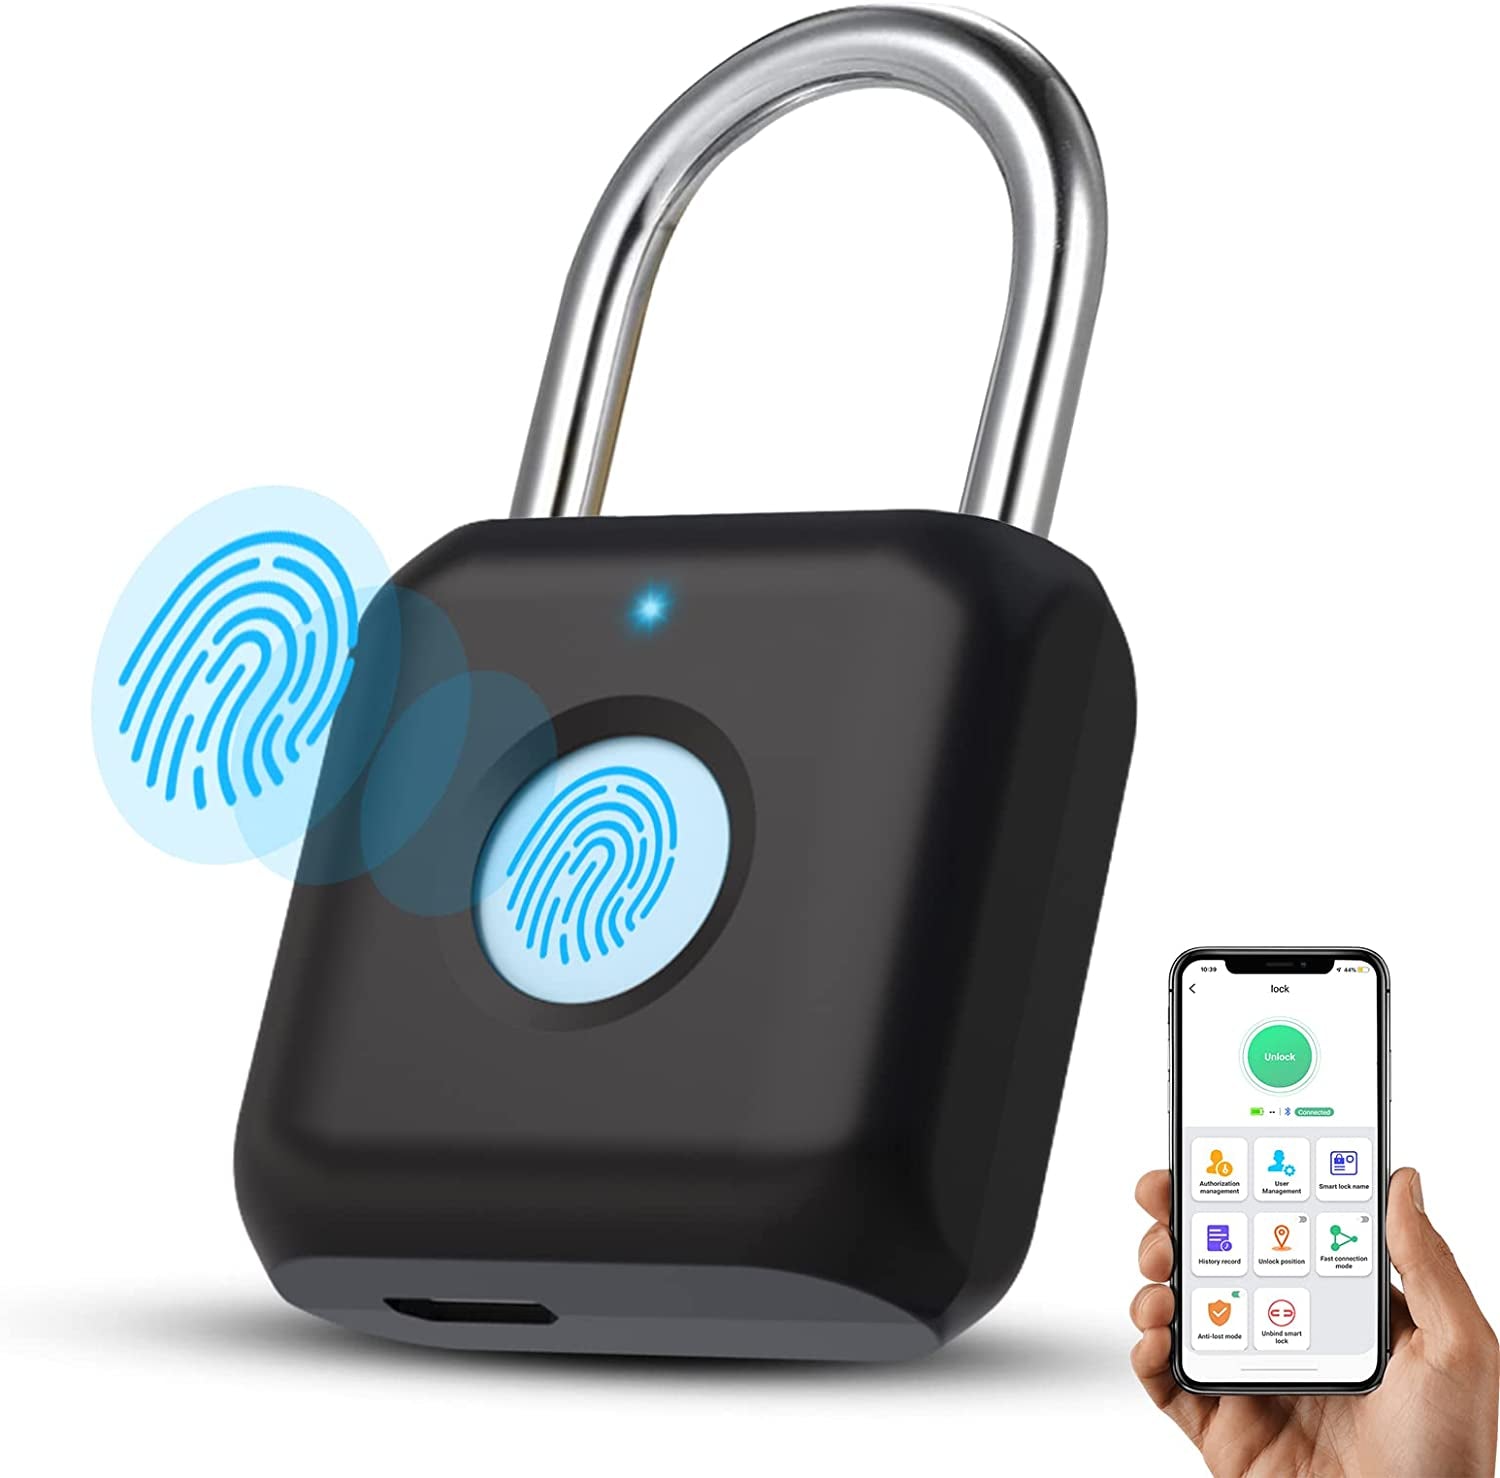 "Ultimate Security: Fingerprint Padlock - Smart, Weatherproof, USB Rechargeable - Ideal for Gym, Bike, School, Fence, and Storage Solutions"